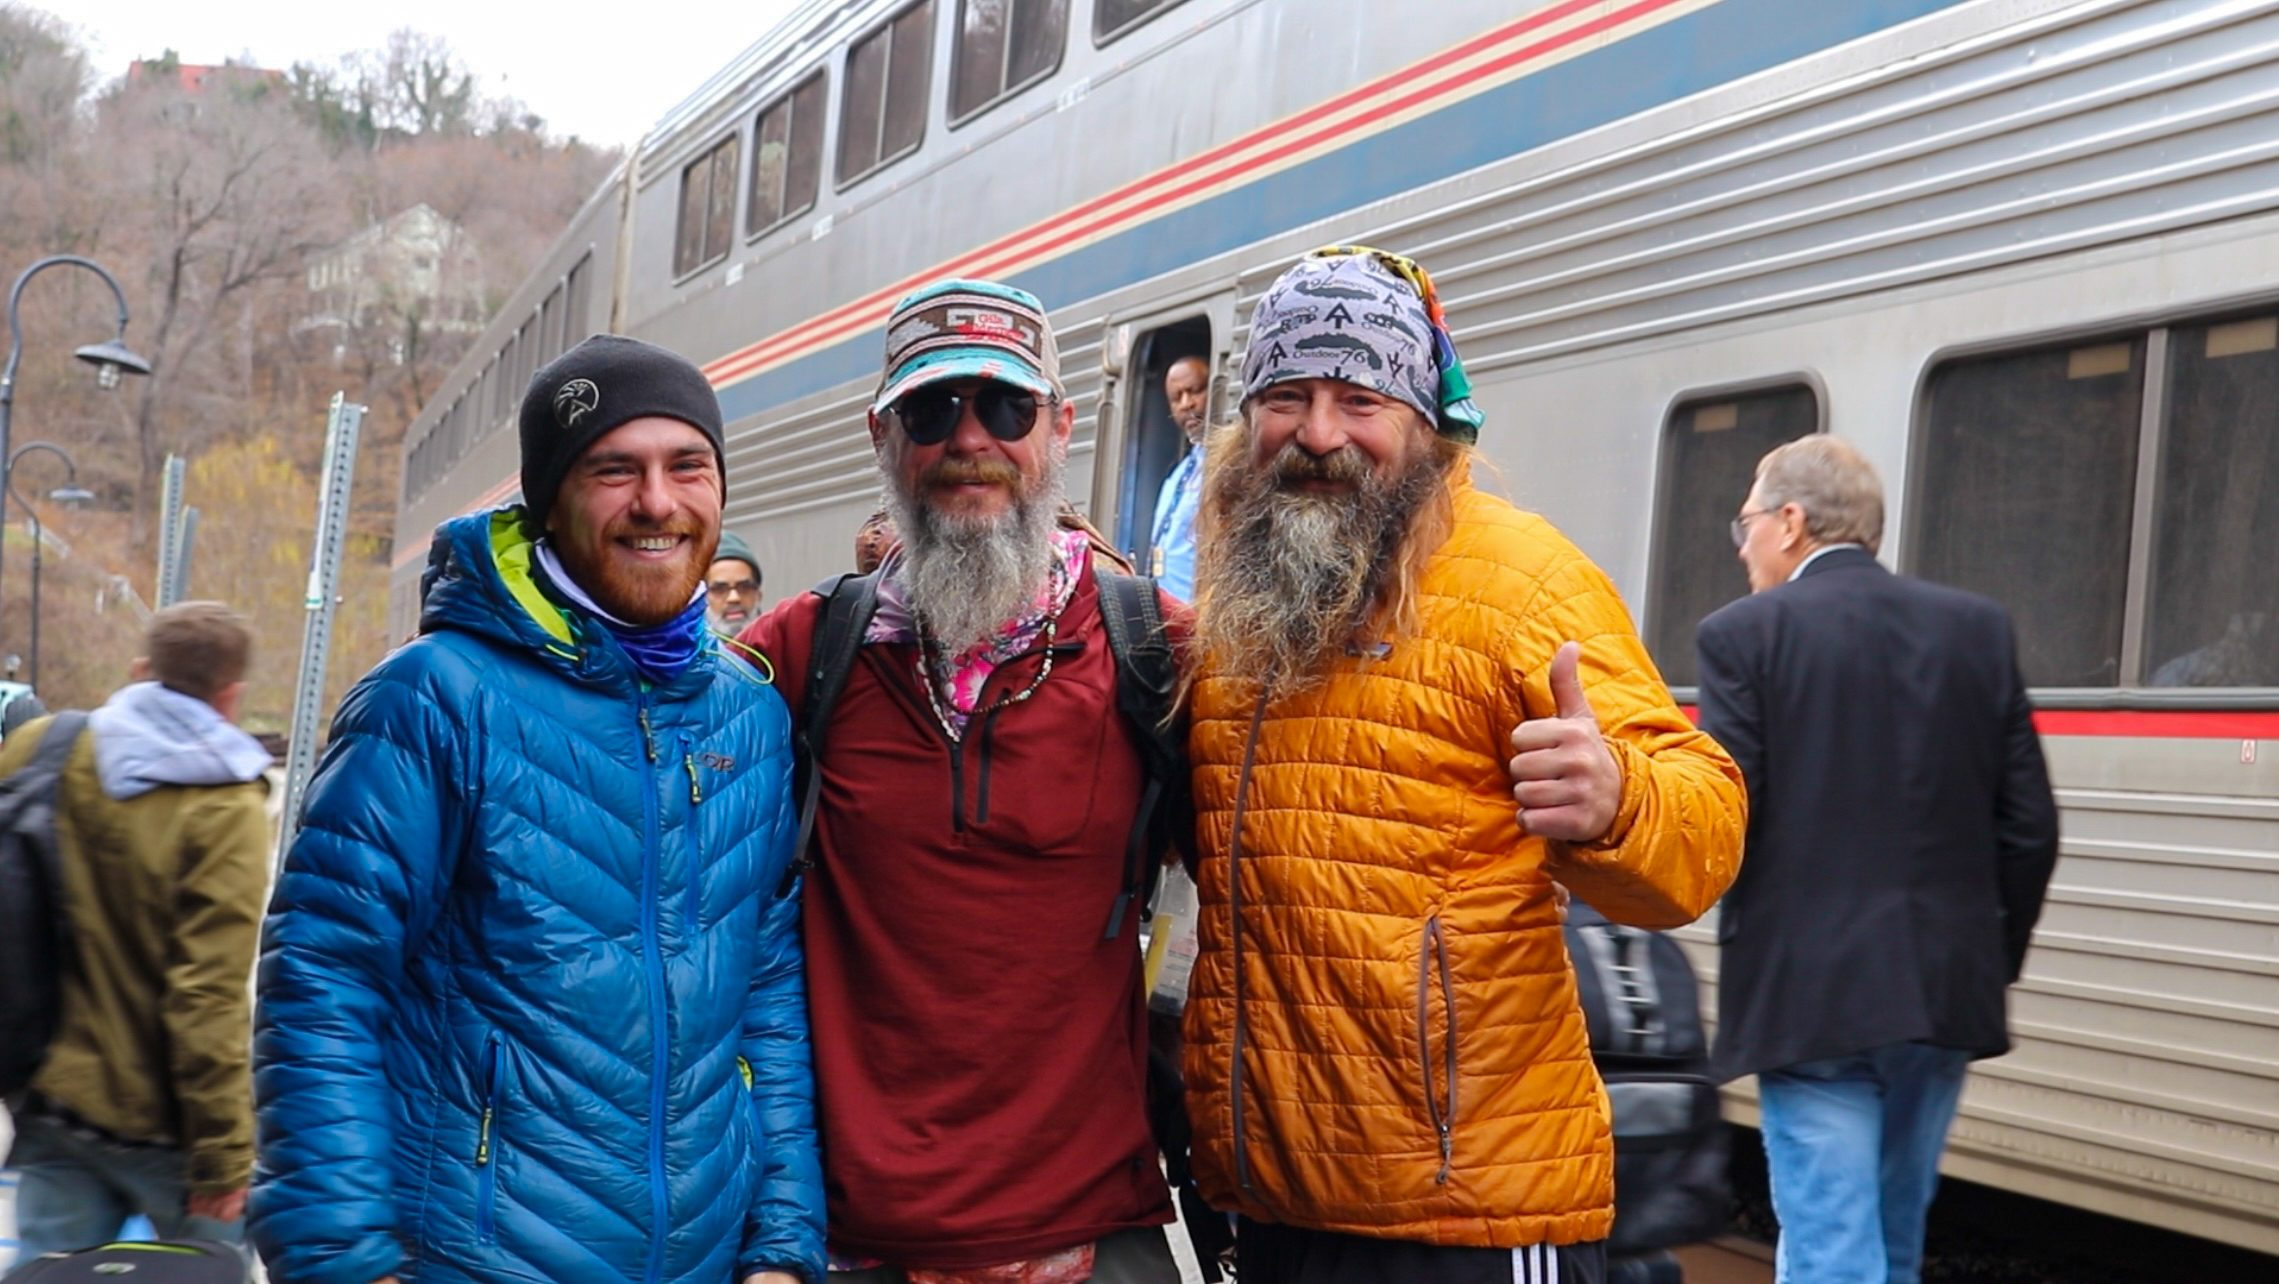 Man returns to West Virginia after successfully thru hiking major US trails, completing the ‘Triple Crown’